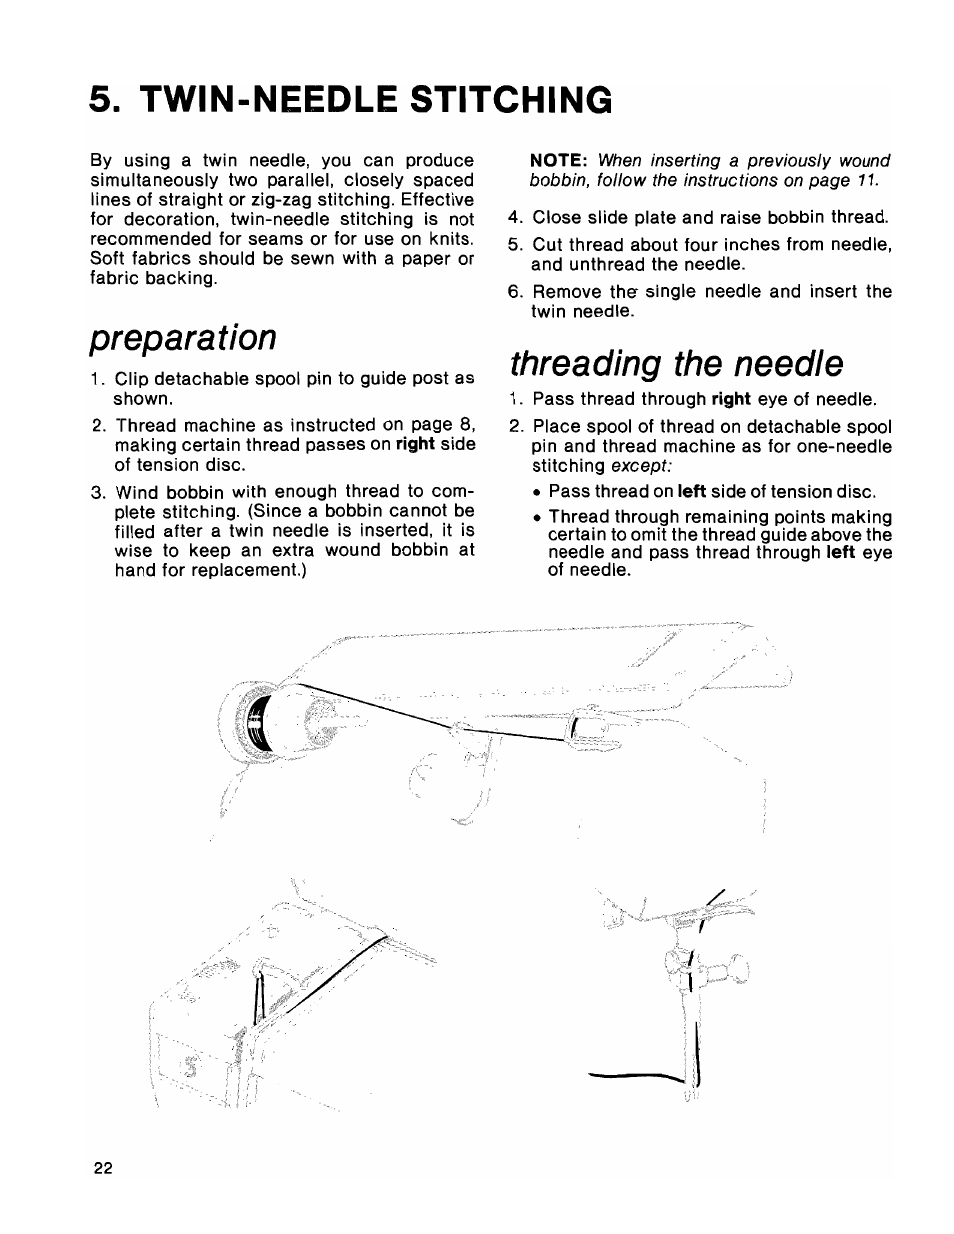 Twin-needle stitching, Preparation, Threading the needie | SINGER 1036 Creative Touch User Manual | Page 27 / 66